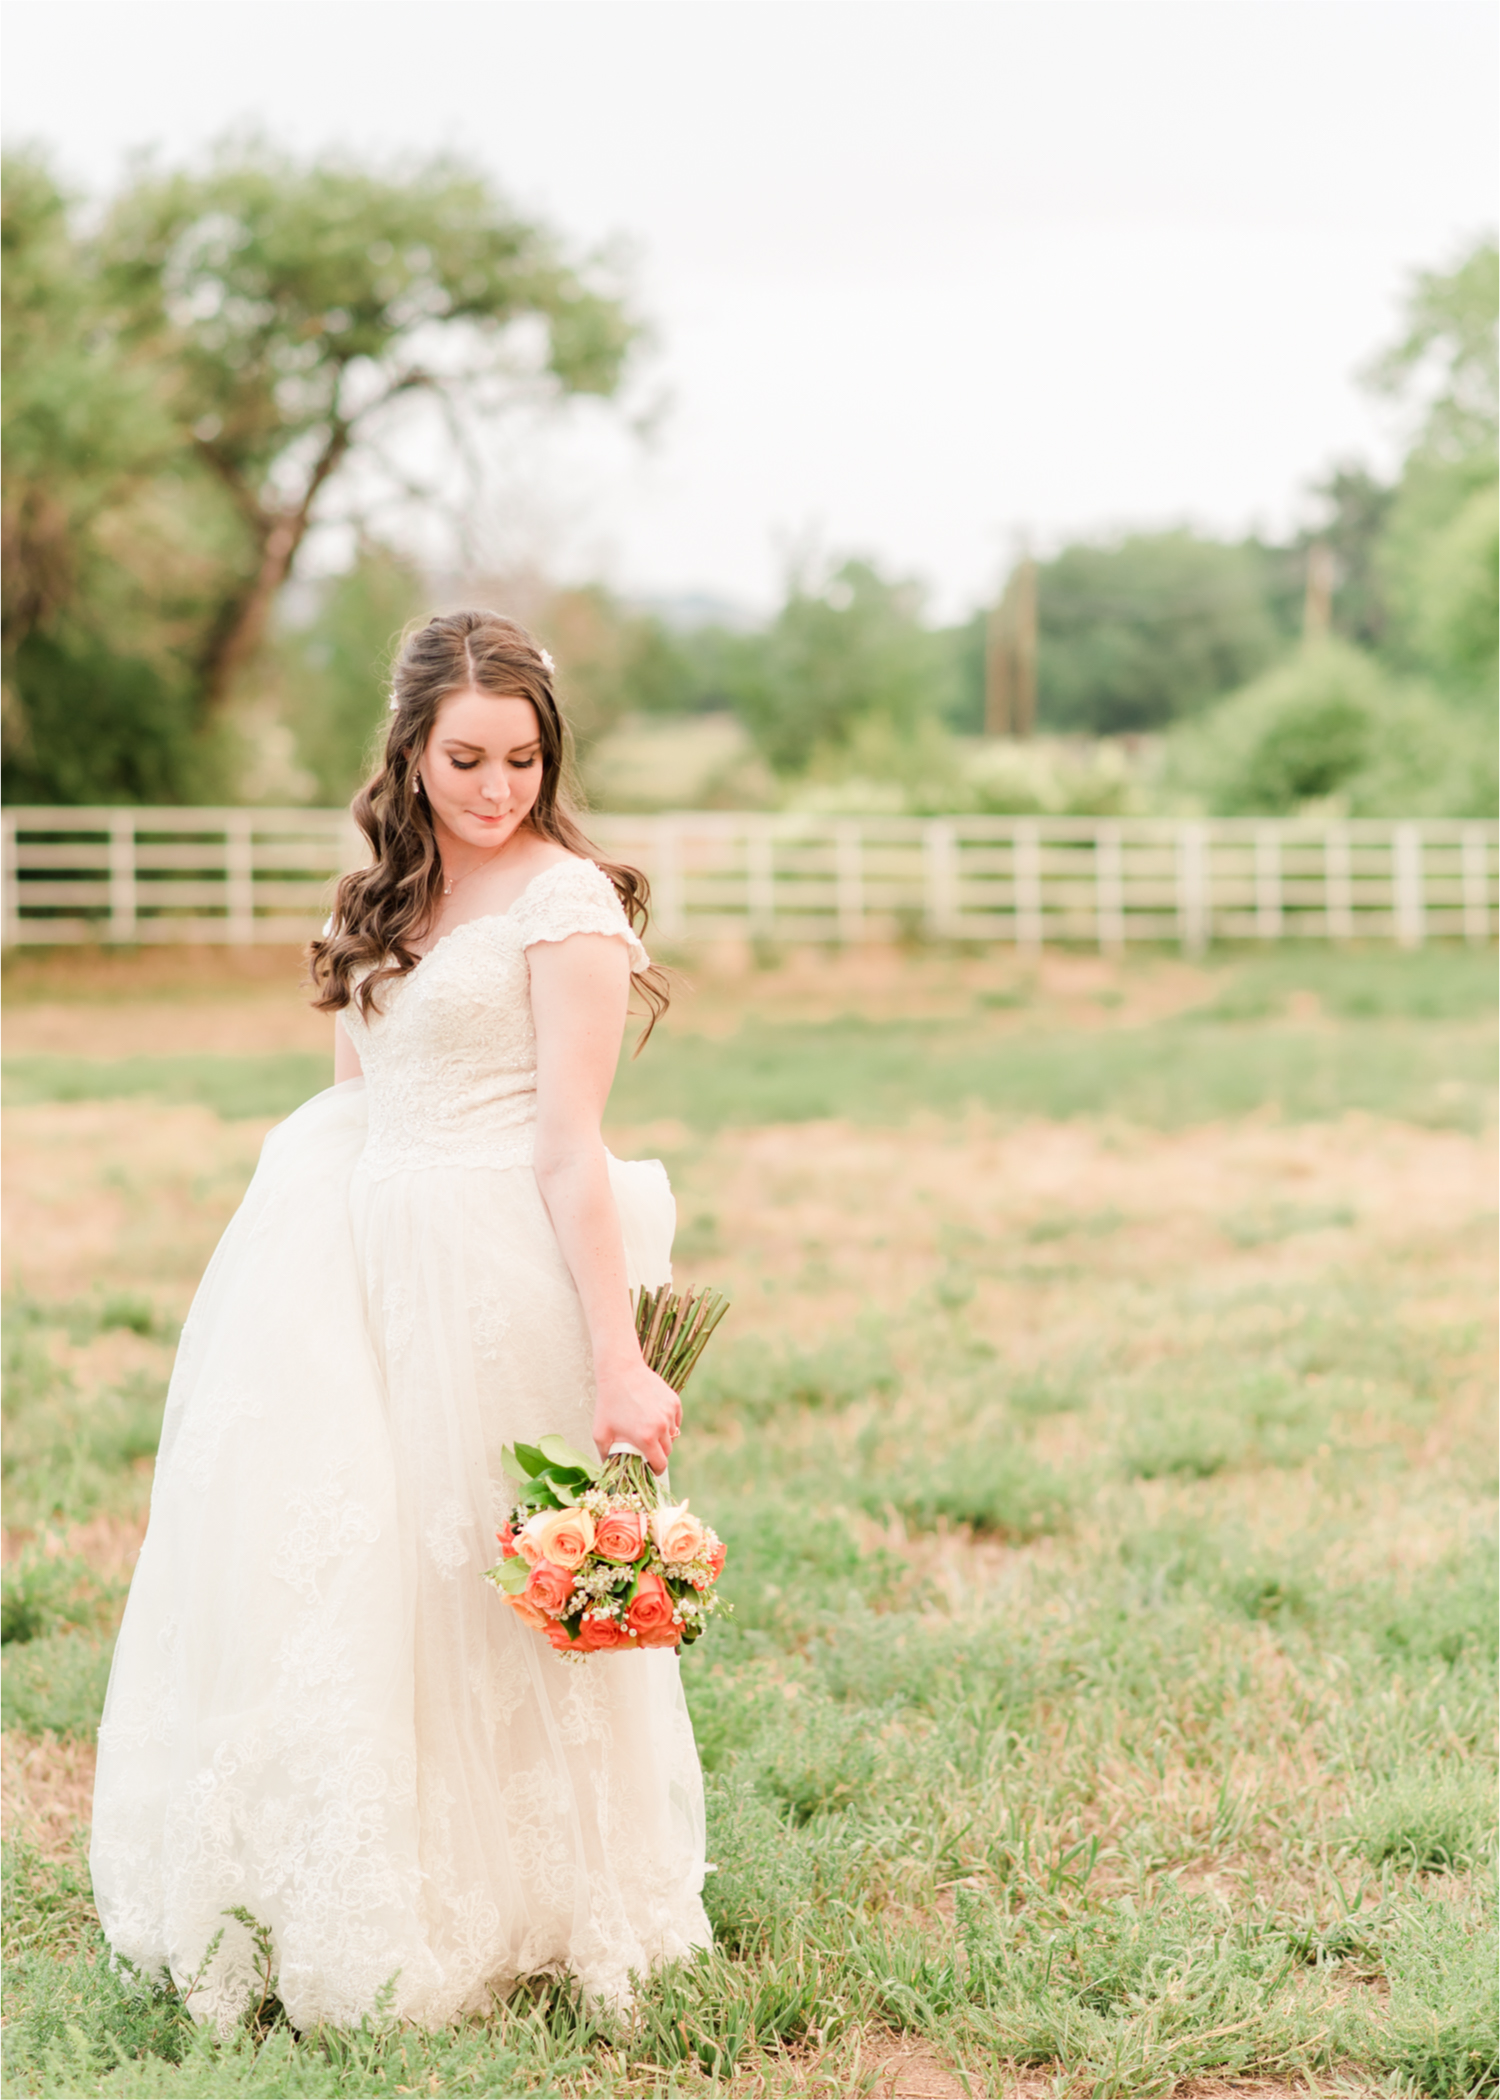 Summer Ellis Ranch Wedding in Loveland Colorado | Britni Girard Photography | Wedding Photo and Video Team | Bride hair Dondi AtWow from Sola Salon in Loveland | Floral hair crystals | Bridal Portraits | Orange Bouquet | Country Field Bride